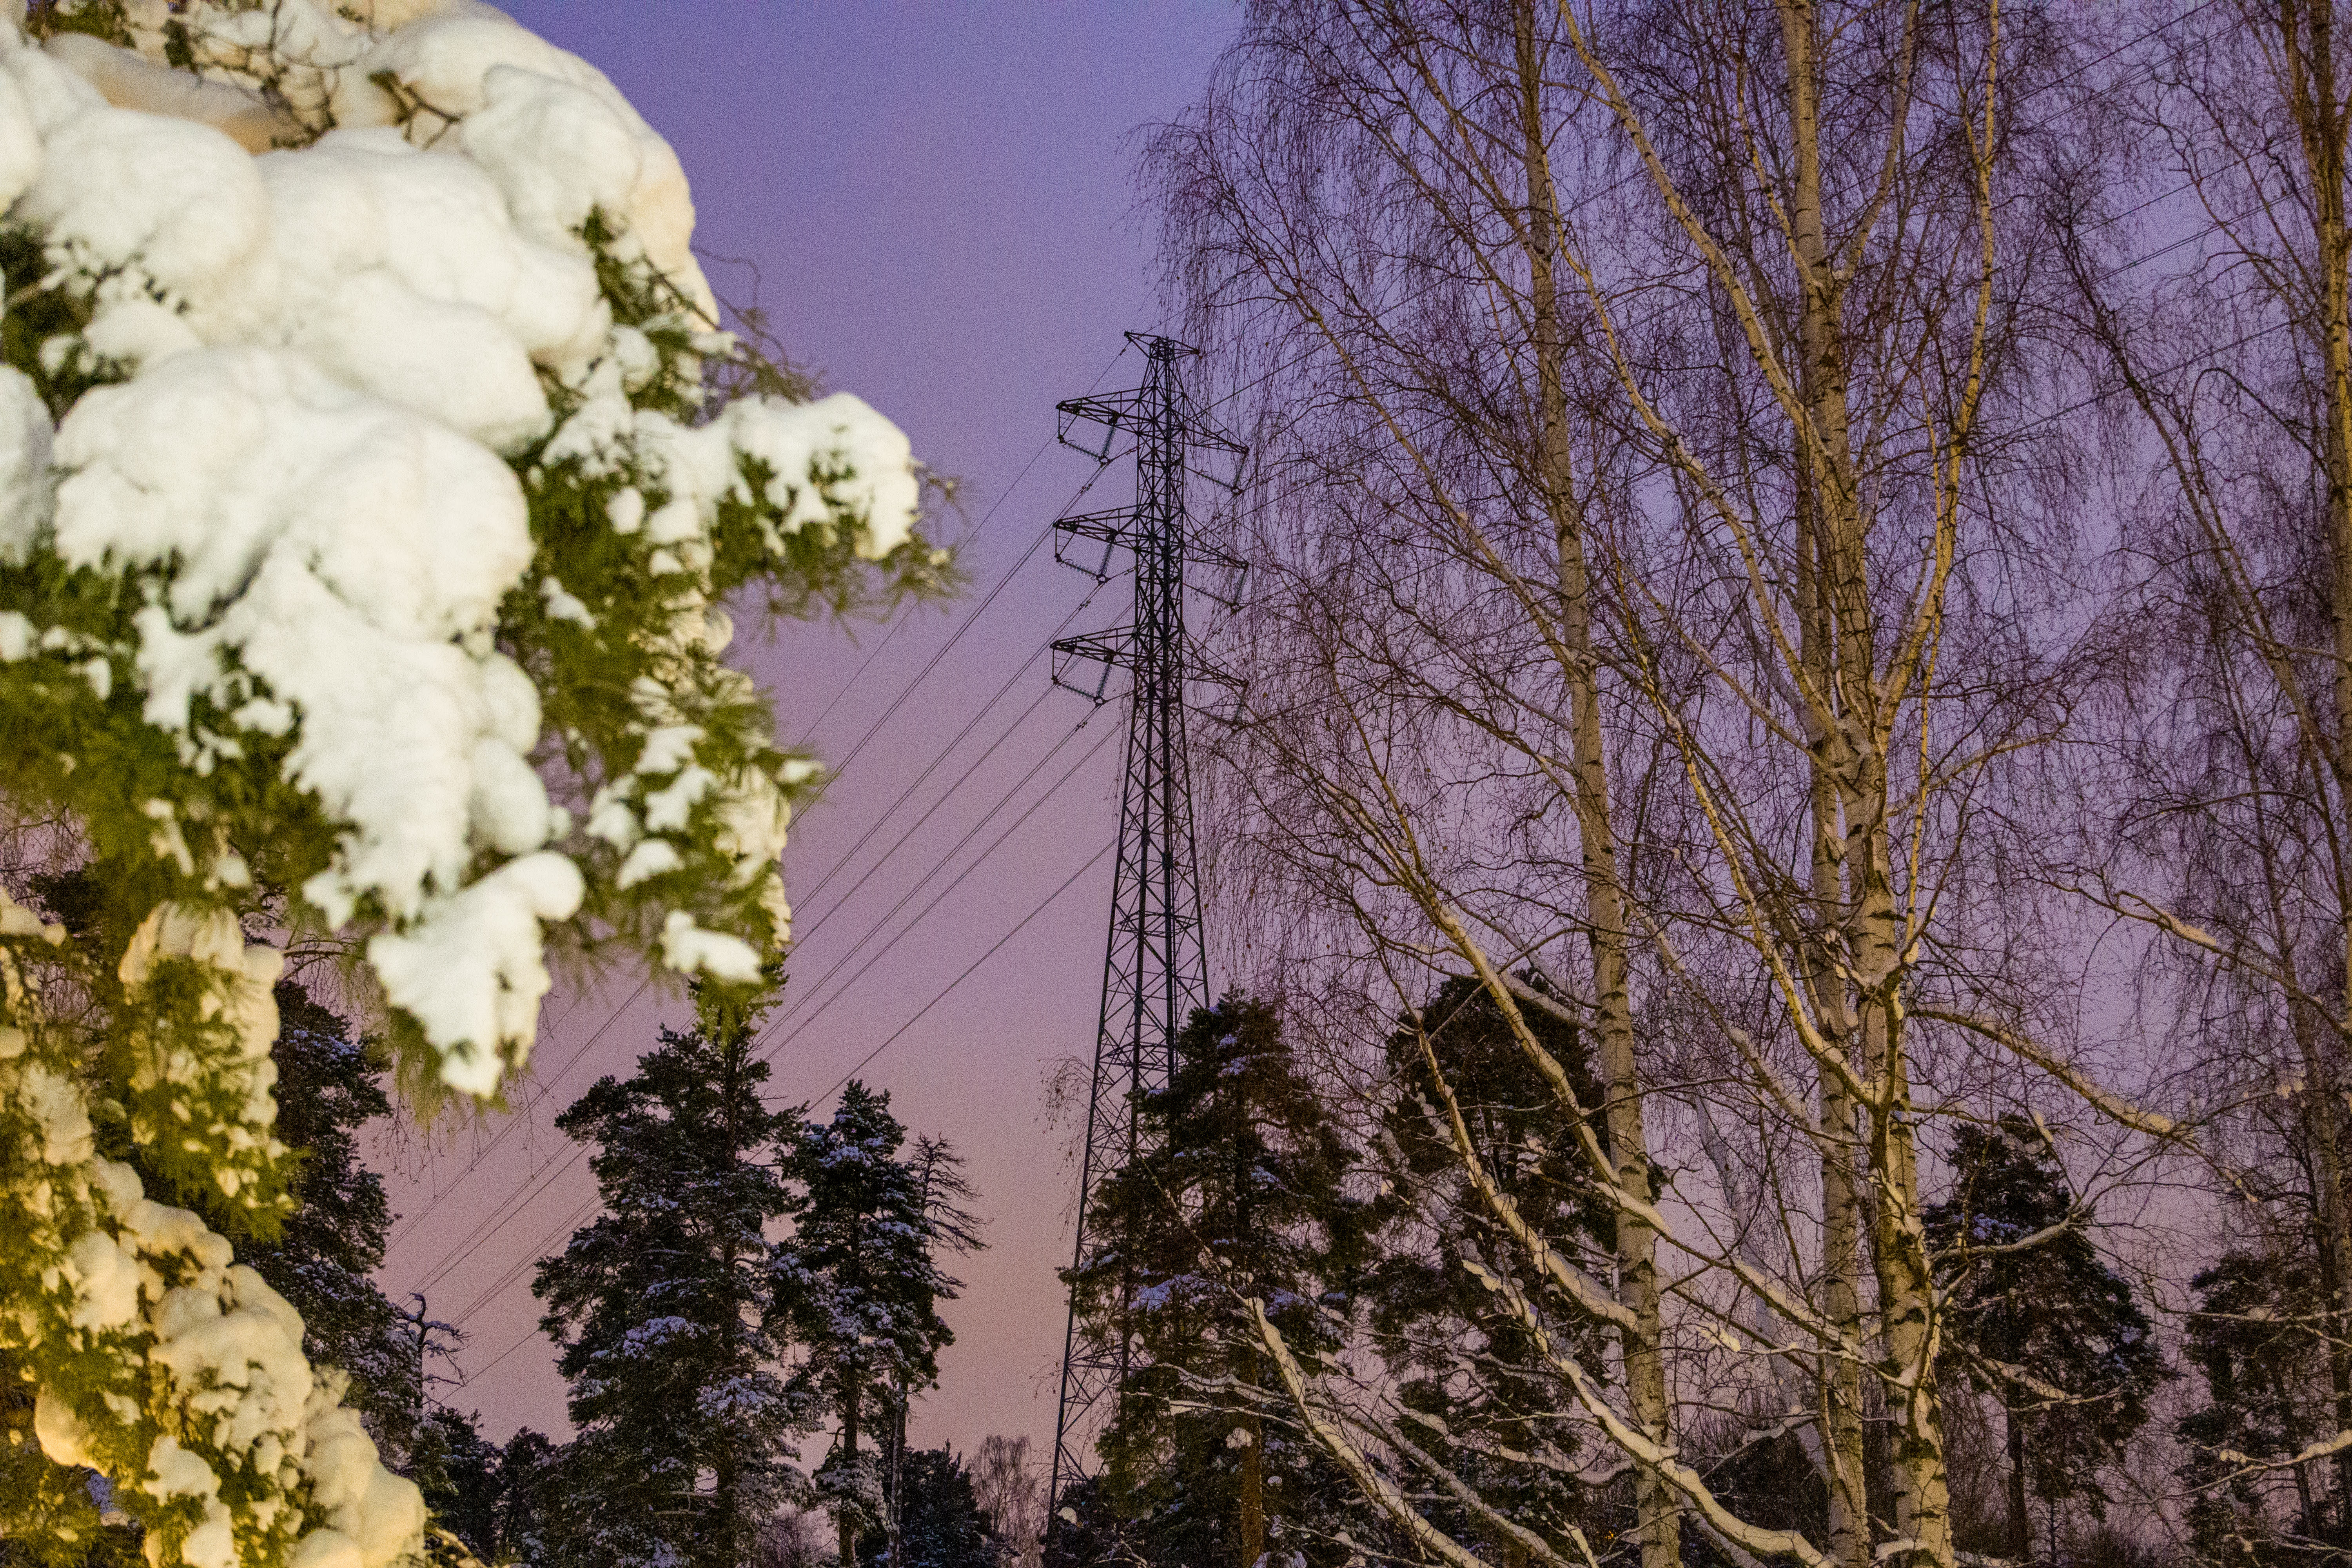 Less than half of the planned winter electricity subsidies are paid